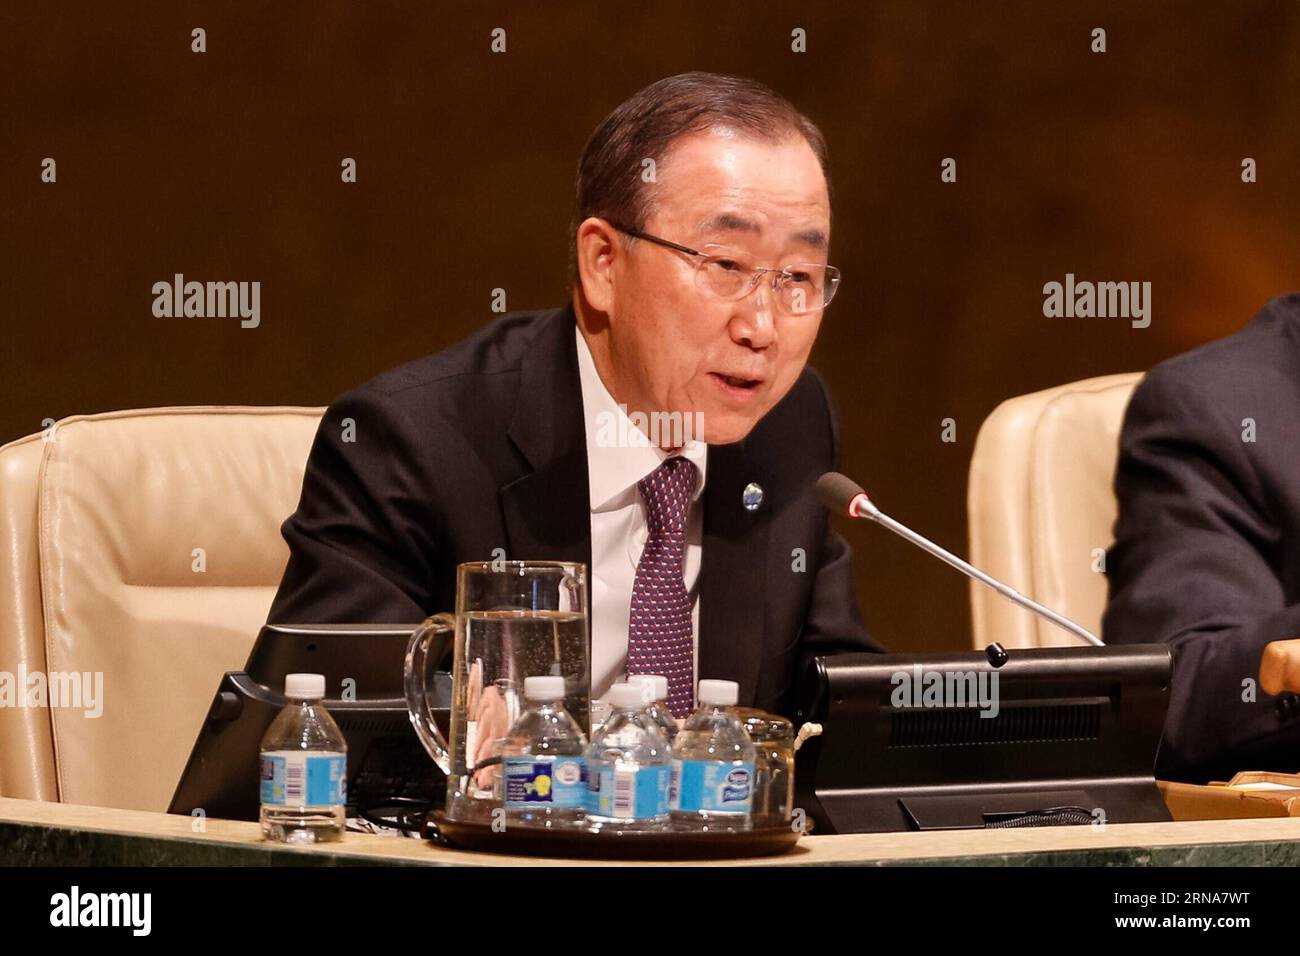 (160111) -- UNITED NATIONS, Jan. 11, 2016 -- The United Nations Secretary-General Ban Ki-moon speaks during a meeting to commemorate the 70th anniversary of the first General Assembly meeting, which was held in 1946 in London, at the United Nations headquarters in New York, Jan. 11, 2016. 70 years ago, on Jan. 10, 51 nations came together at Westminster Central Hall in London for the meeting after the UN Charter, the foundational treaty of the organization, was signed in San Francisco in 1945. ) UN-GENERAL ASSEMBLY-70TH ANNIVERSARY LixMuzi PUBLICATIONxNOTxINxCHN   160111 United Nations Jan 11 Stock Photo